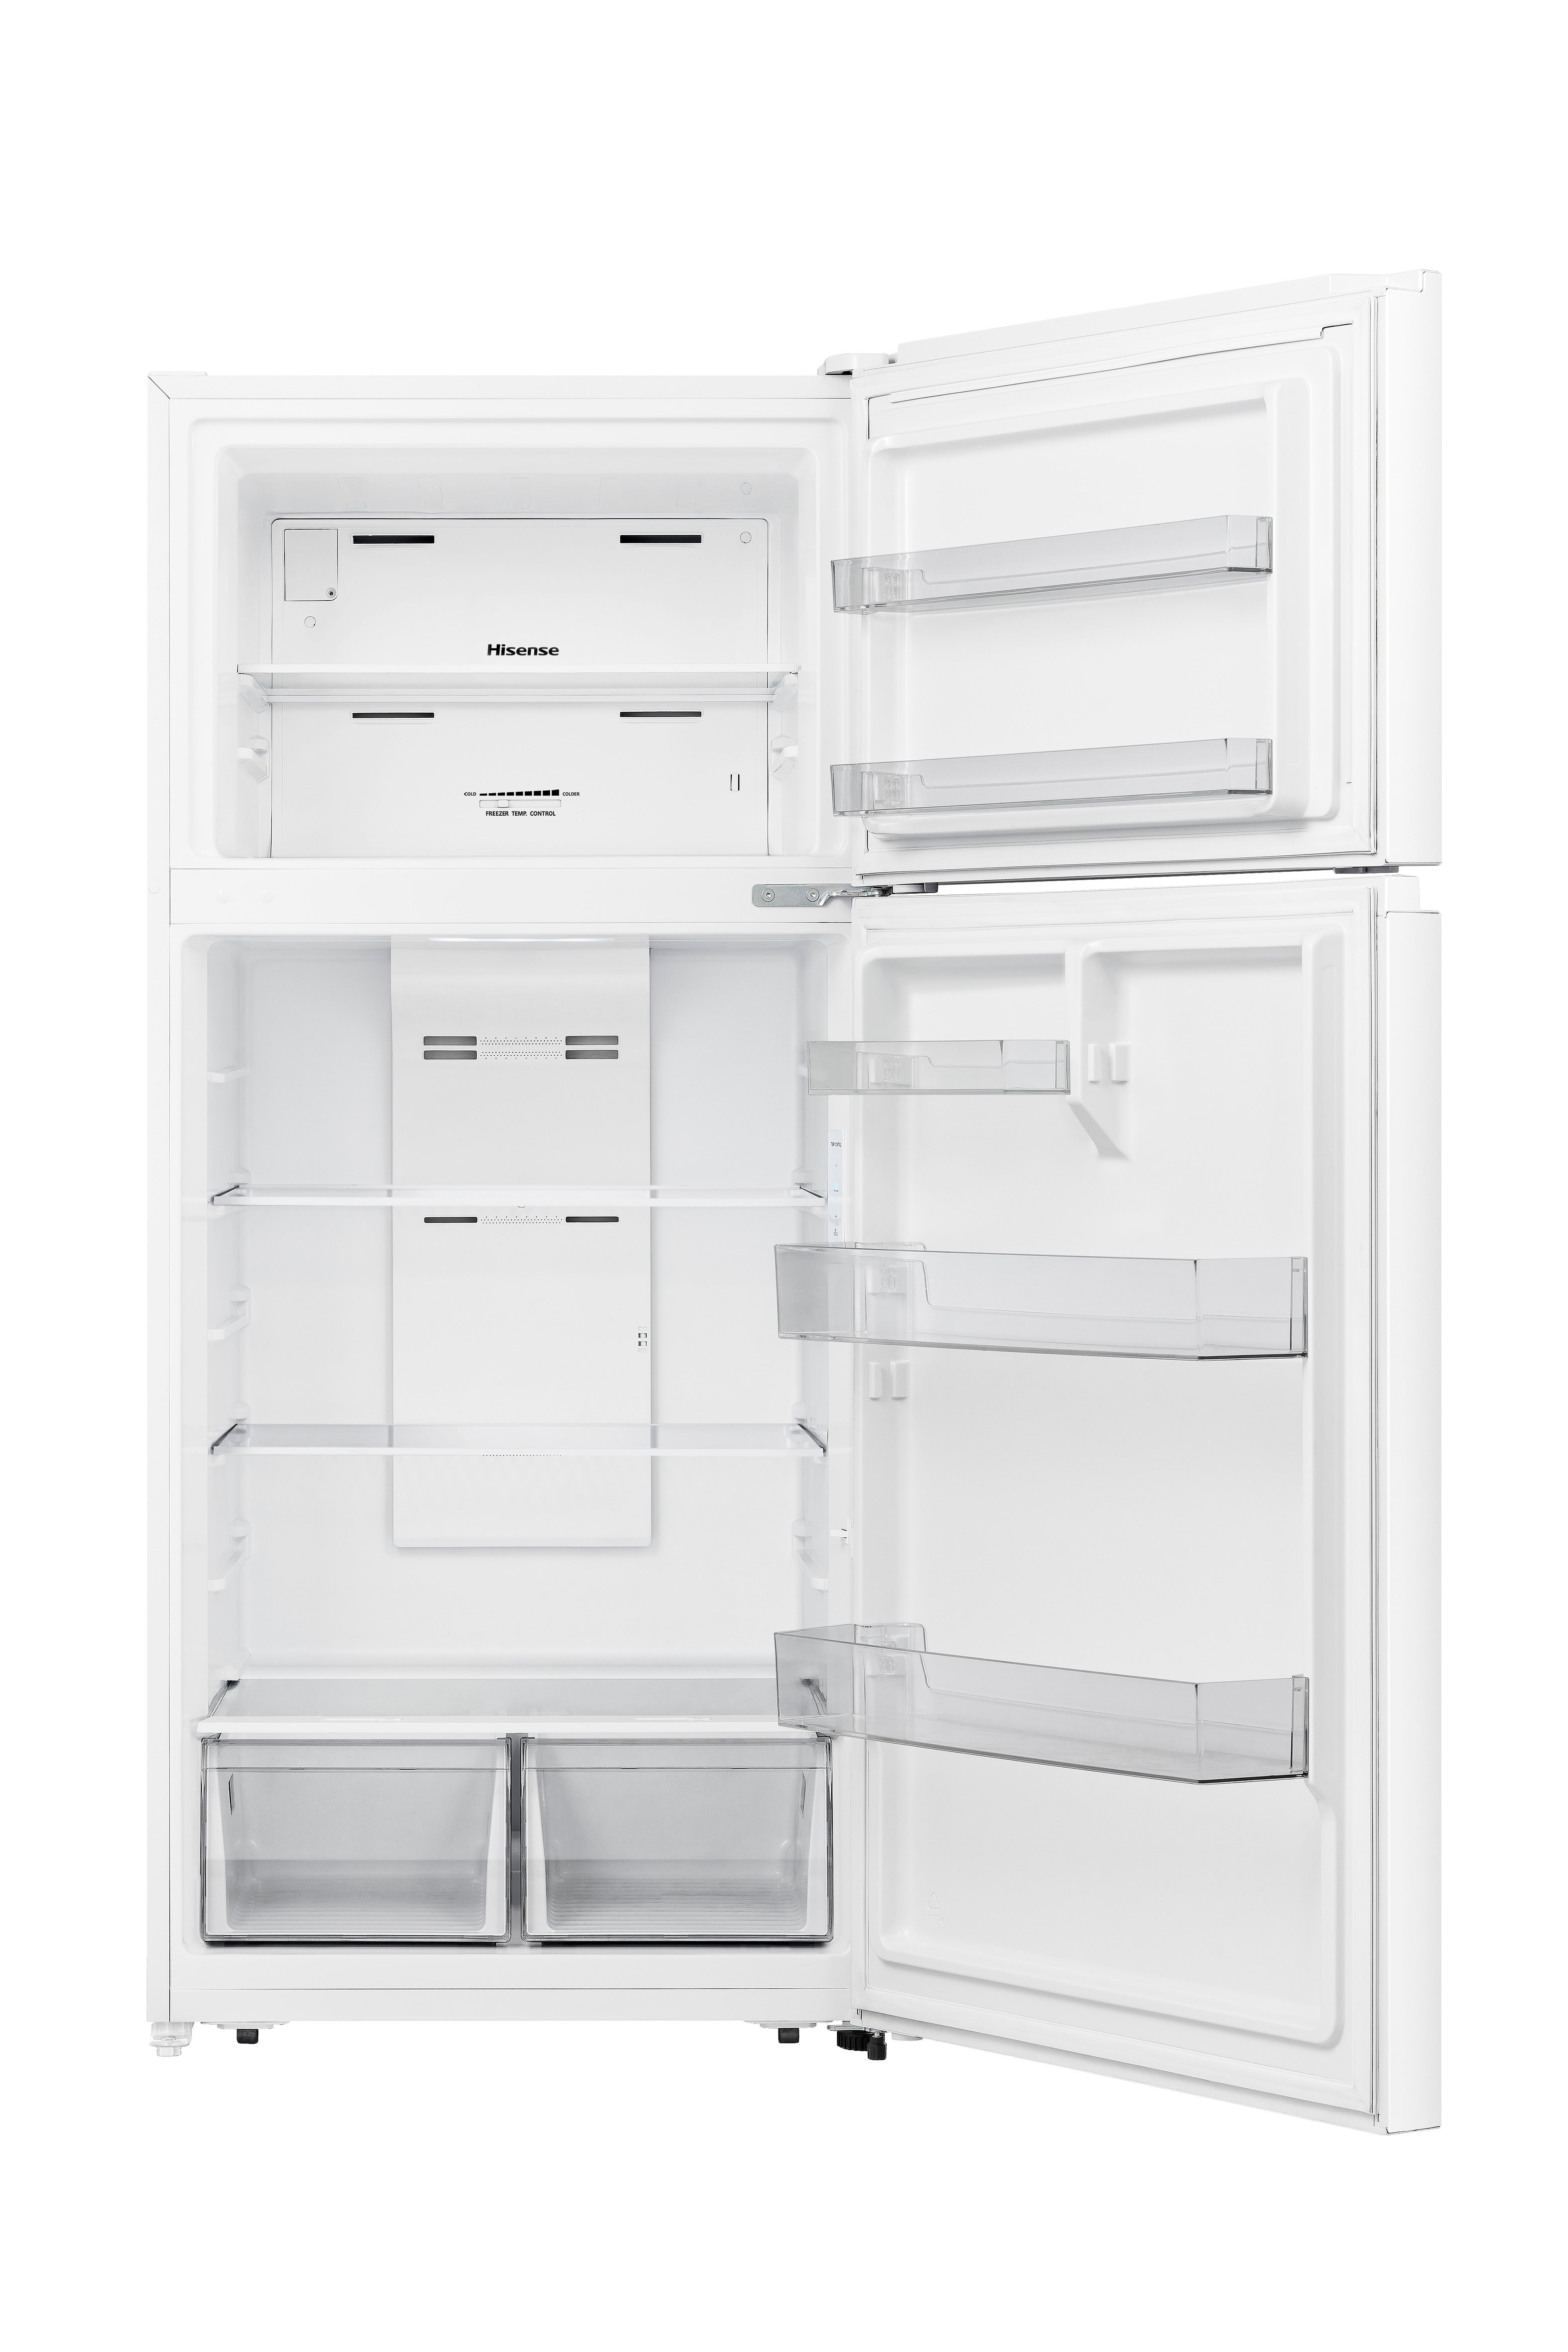 Hisense - 29.7 Inch 18 cu. ft Top Mount Refrigerator in White - RT18A2FWD